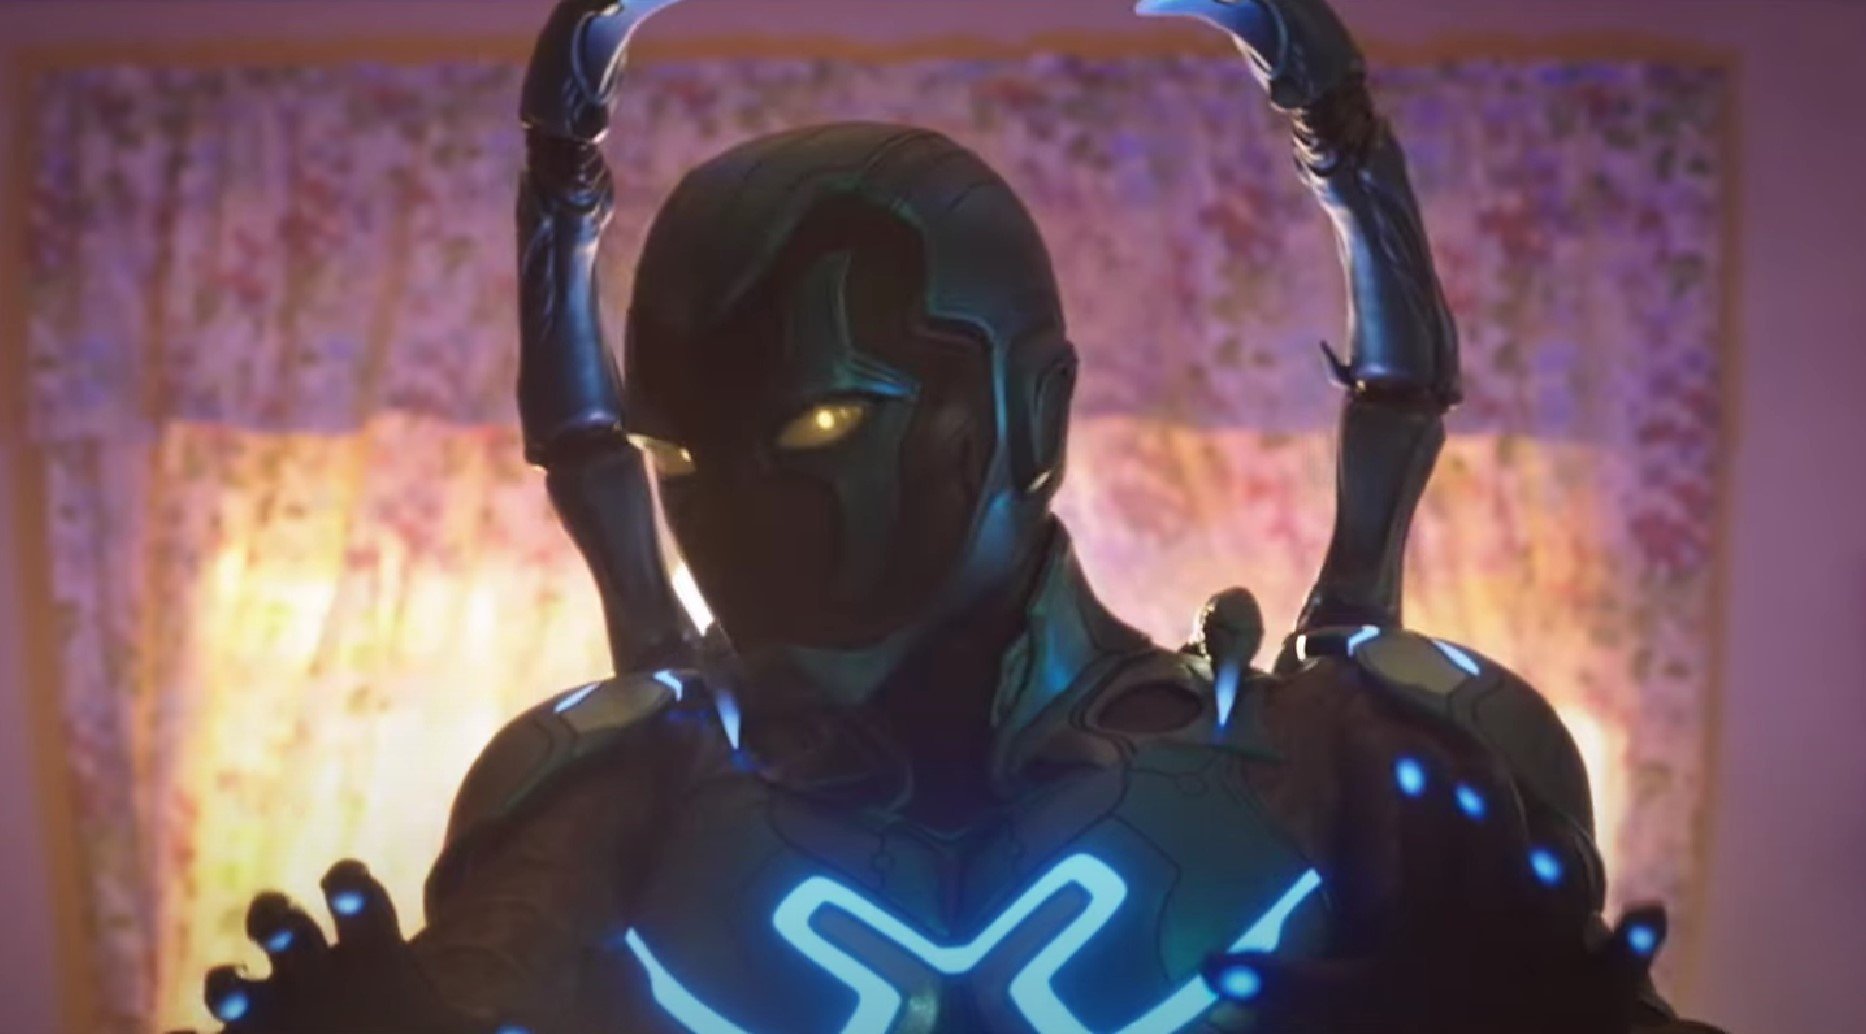 ‎Screenshot of Xolo Maridueña as Blue Beetle in the DC film, 'Blue Beetle.' The suit is blue and black, with parts that glow lighter blue. It has gold eyes, and there are wings coming out of the back. Blue Beetle is holding his hands up reassuringly as he stands in a living room in front of floral curtains. 